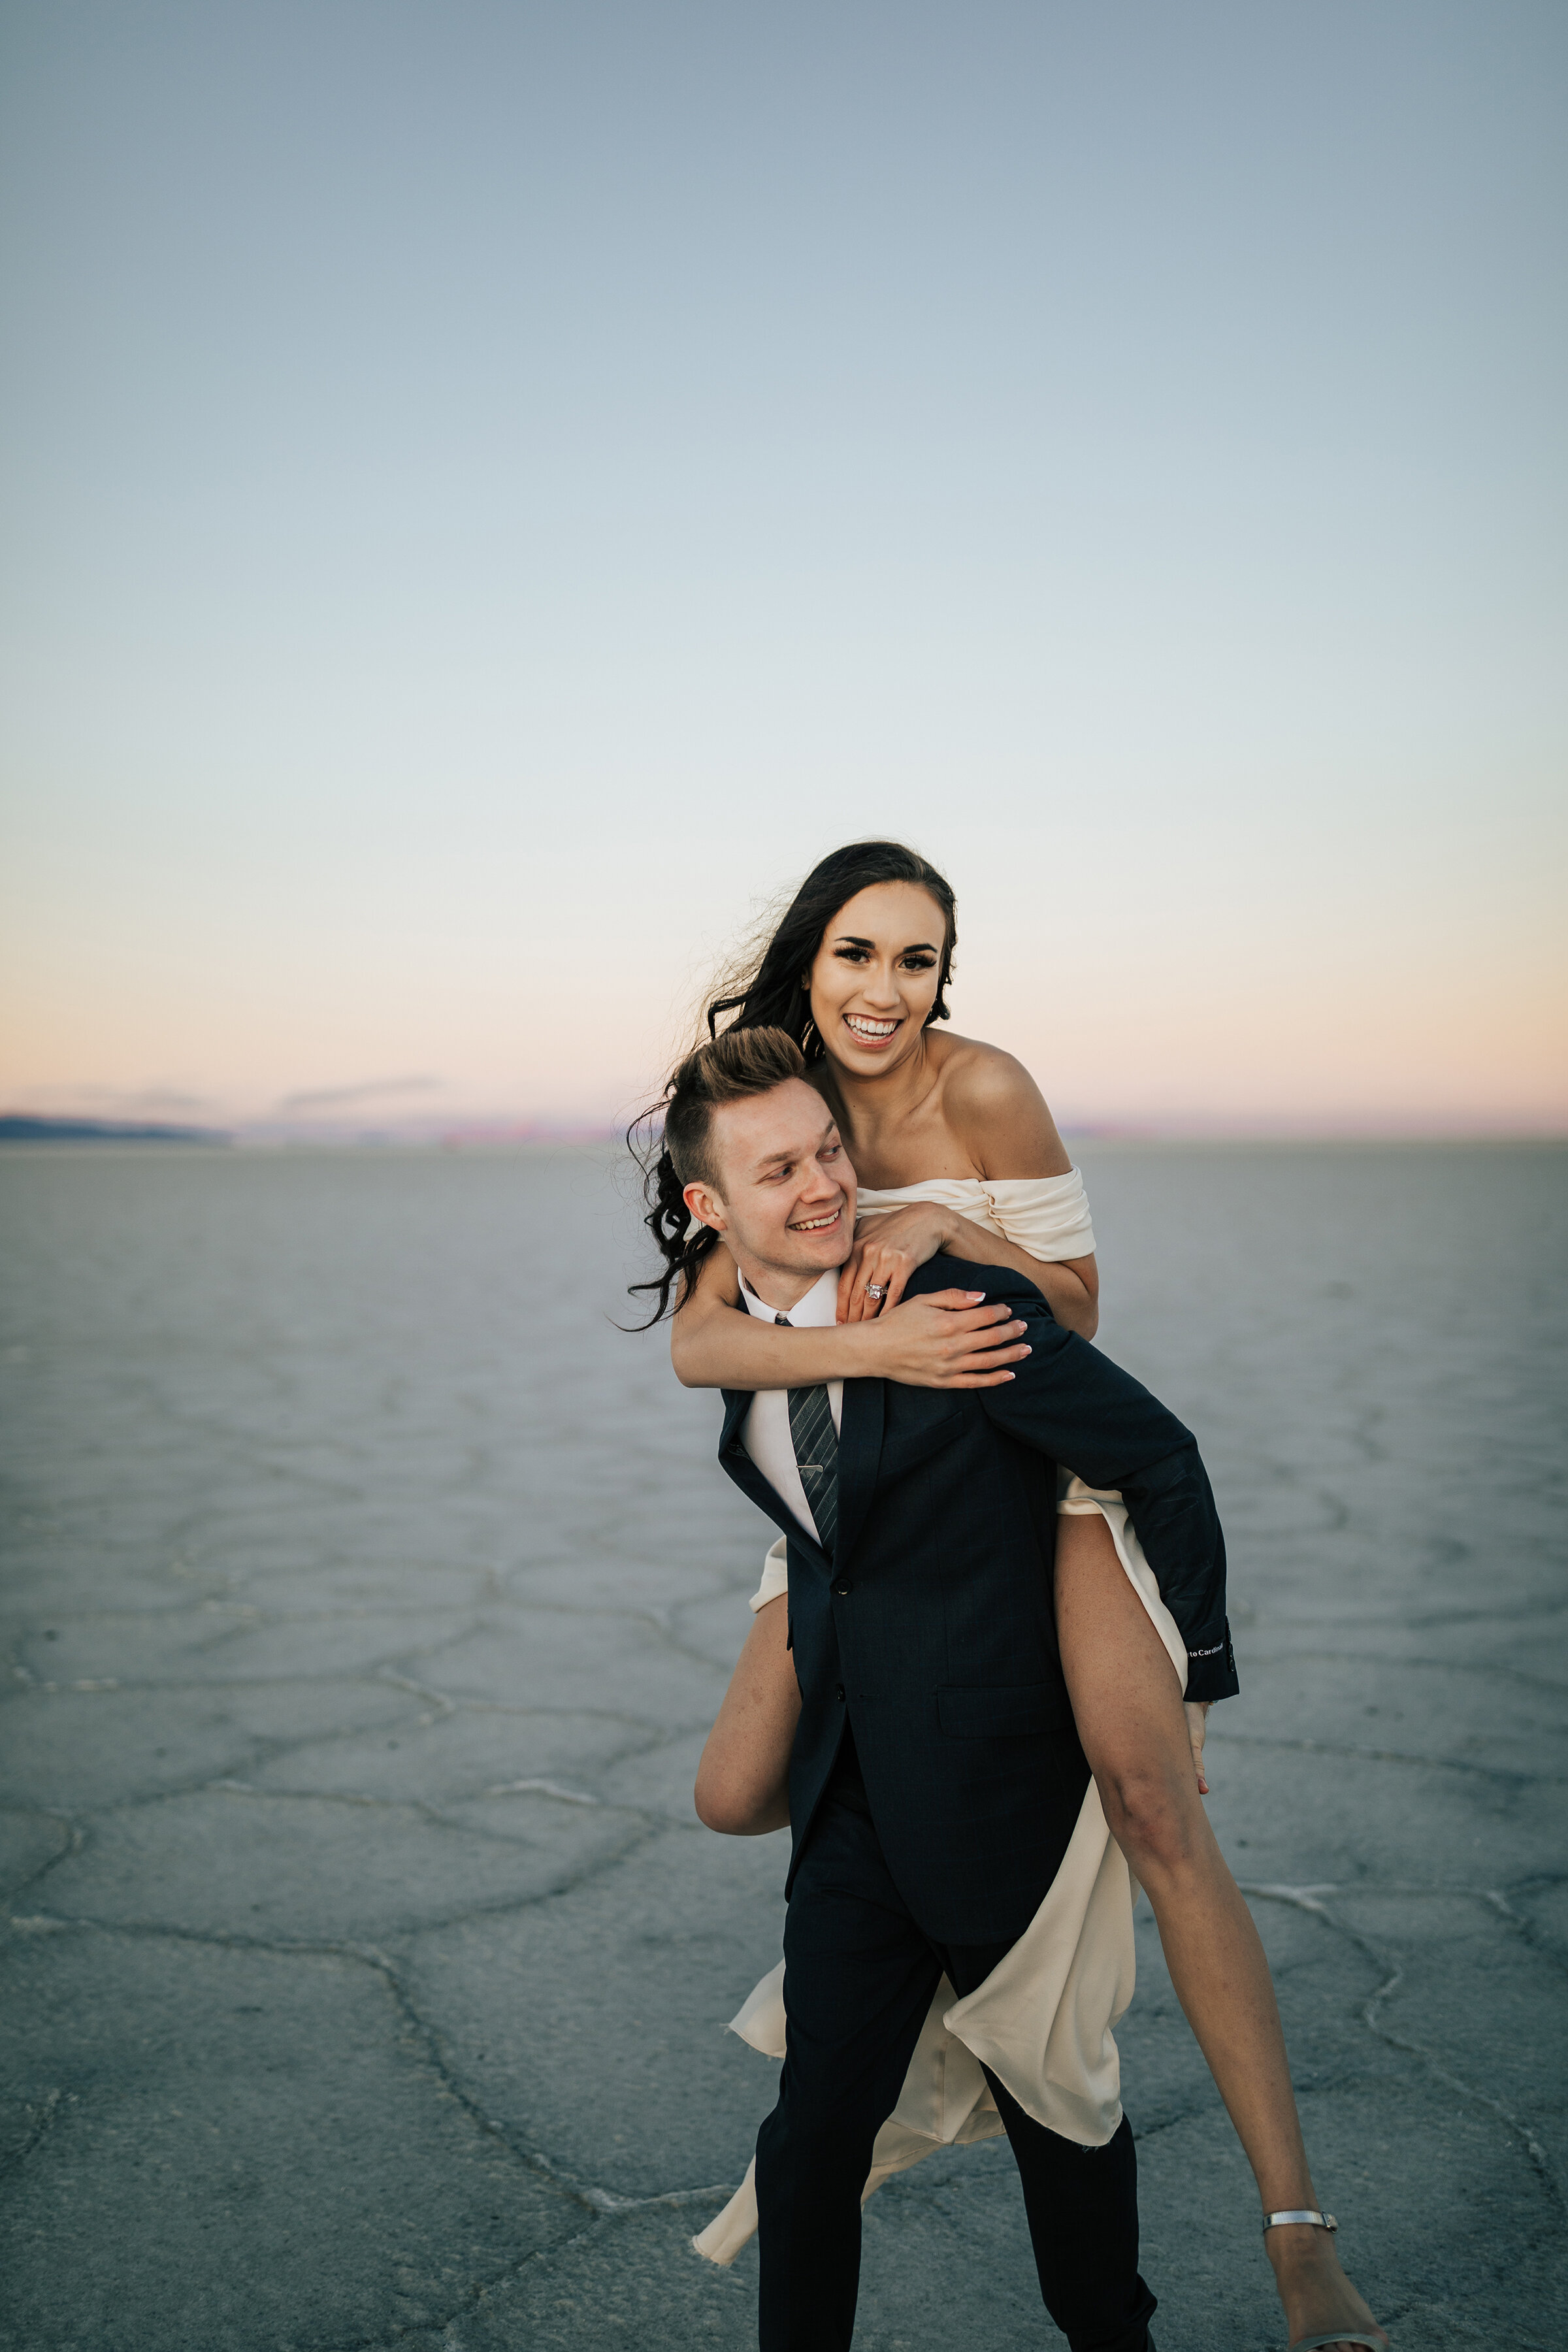  A playful groom gives his bride a piggy back ride in a beautiful hazy elopement styled photo shoot in the Utah desert. Professional Utah photographer Emily Jenkins Photography couple goals playful couple pose inspiration outdoor photo shoot goals id